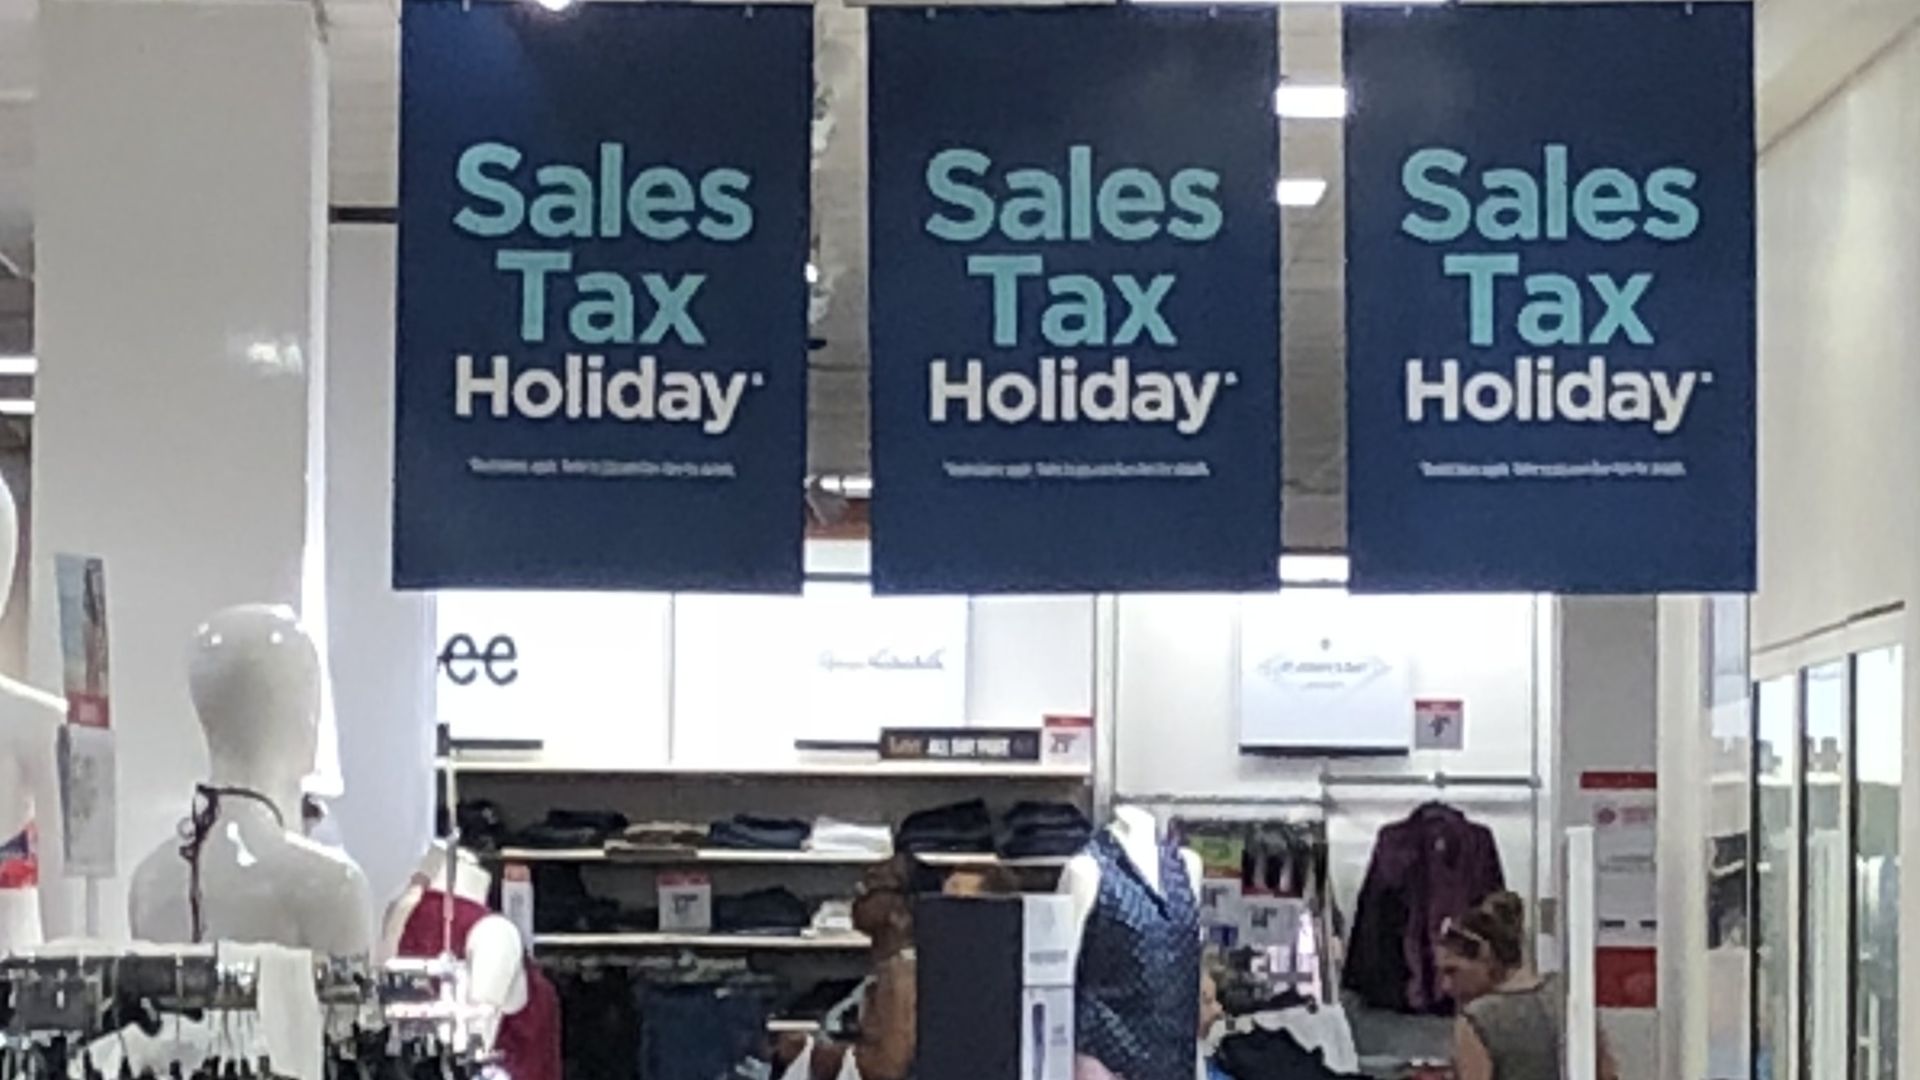 Sales tax holiday signs hang in a store 